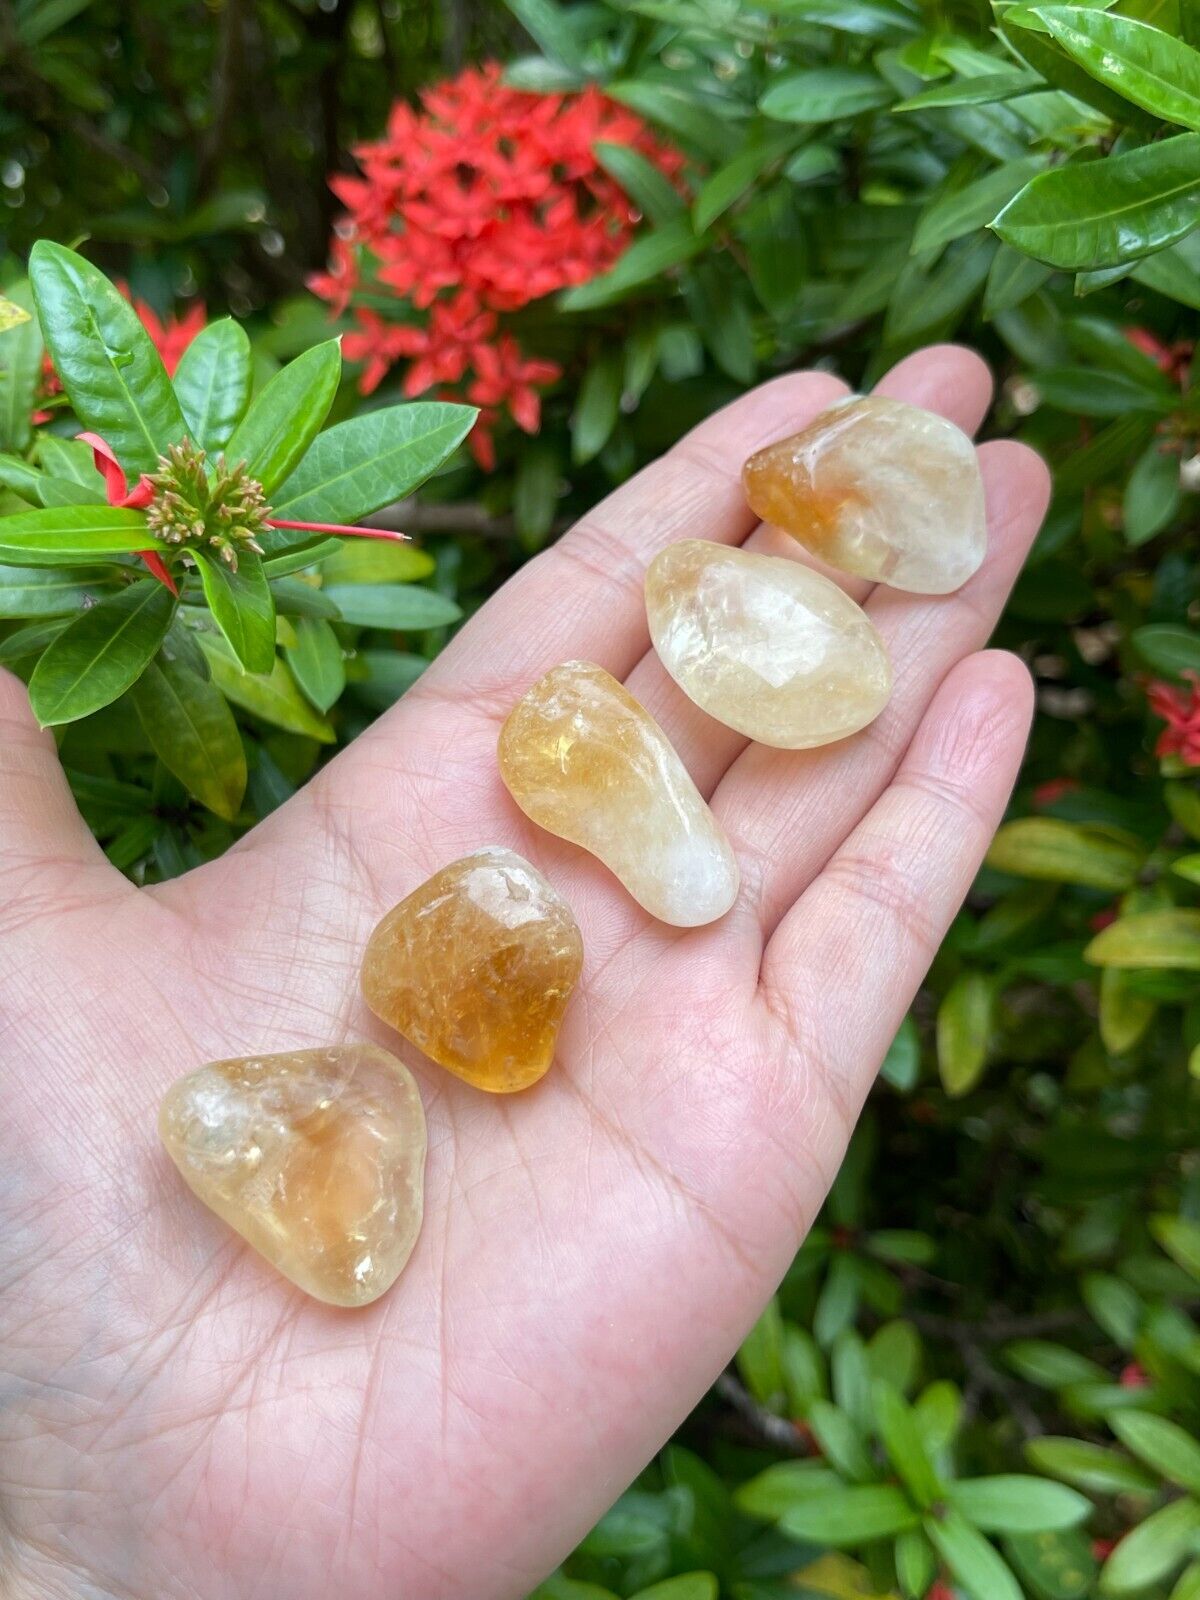 5 Pieces Tumbled Stones, Choose From 70 Typle Gemstones, Polished Stones